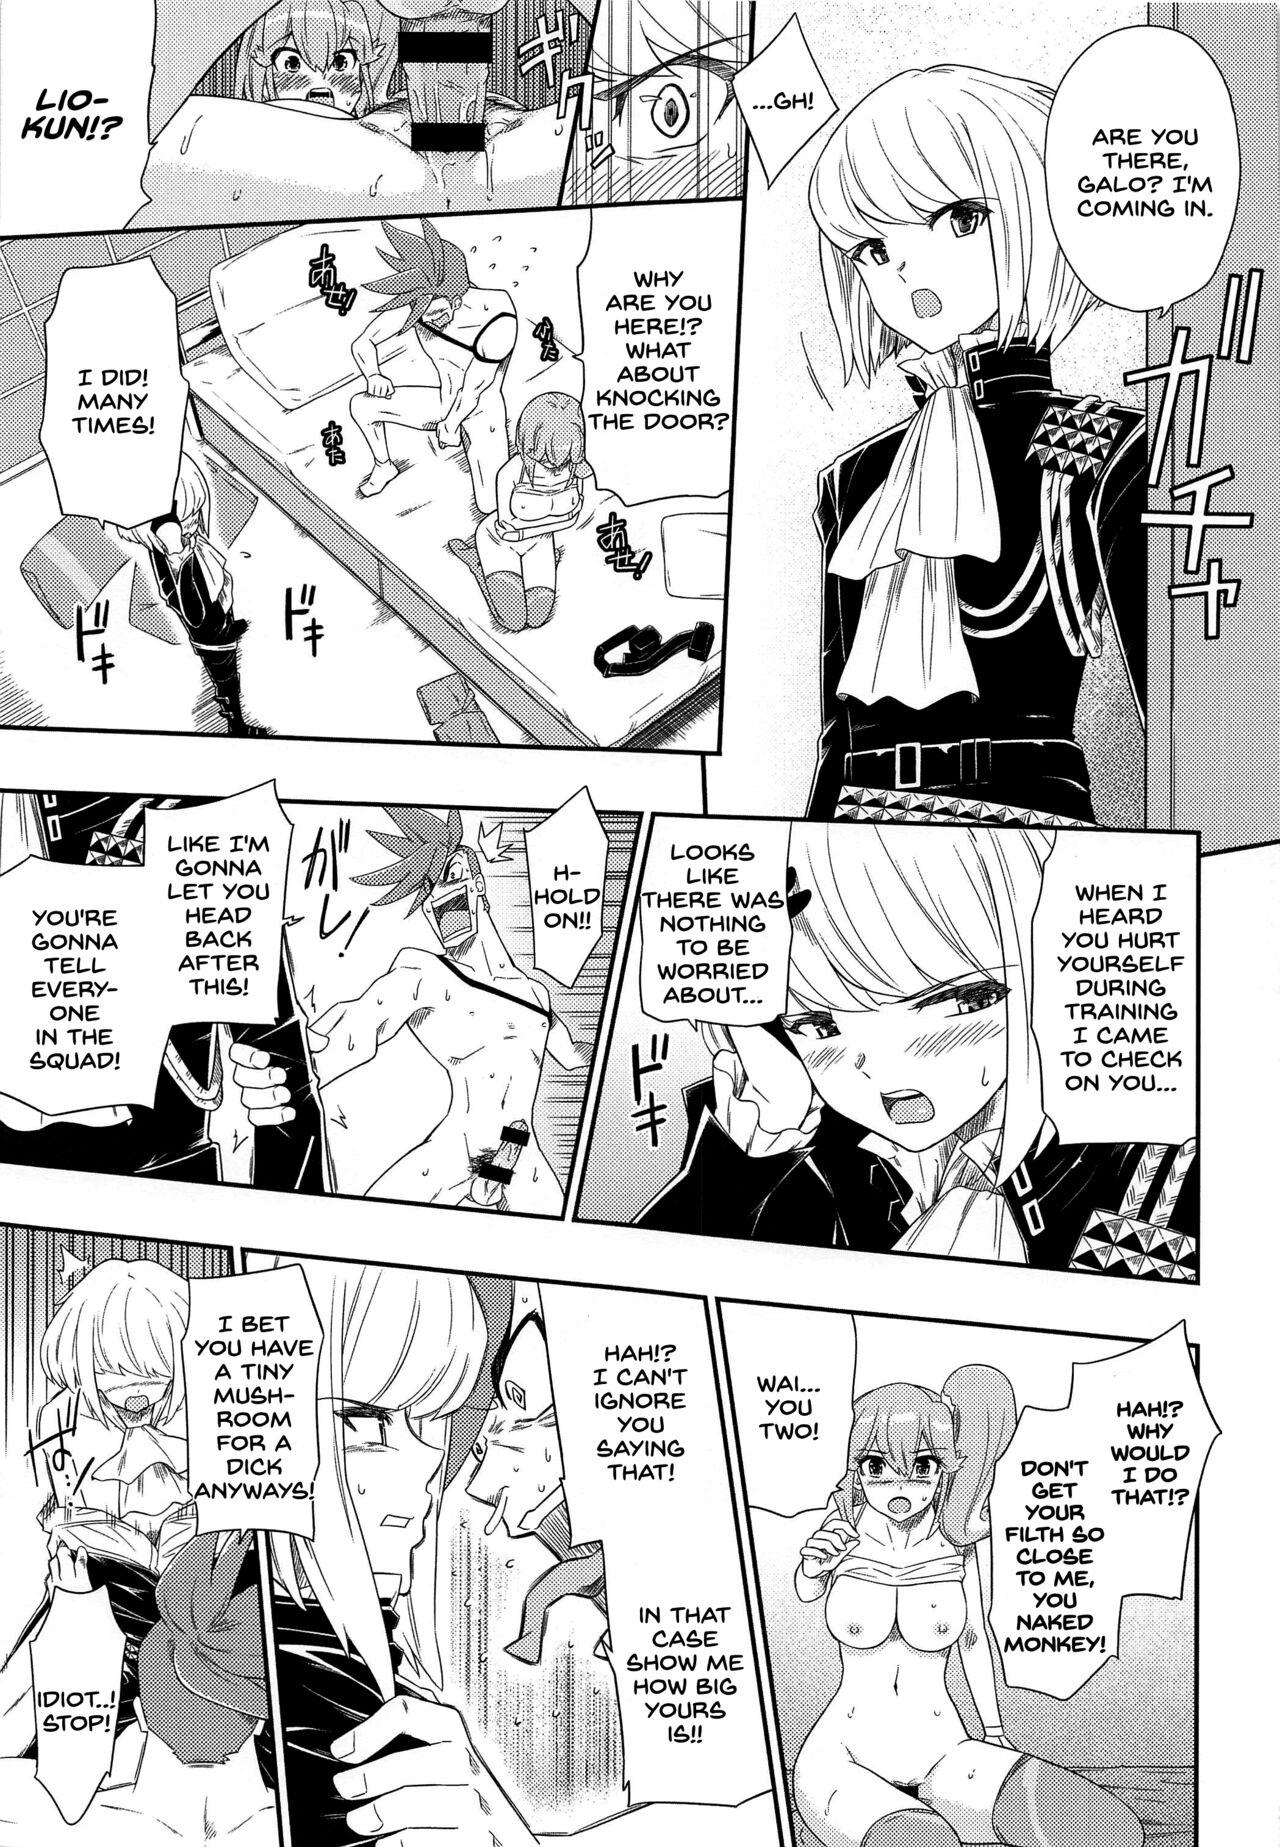 Best Blowjob EROMARE - Suddenly 3P sex is happening... Xxx - Page 6